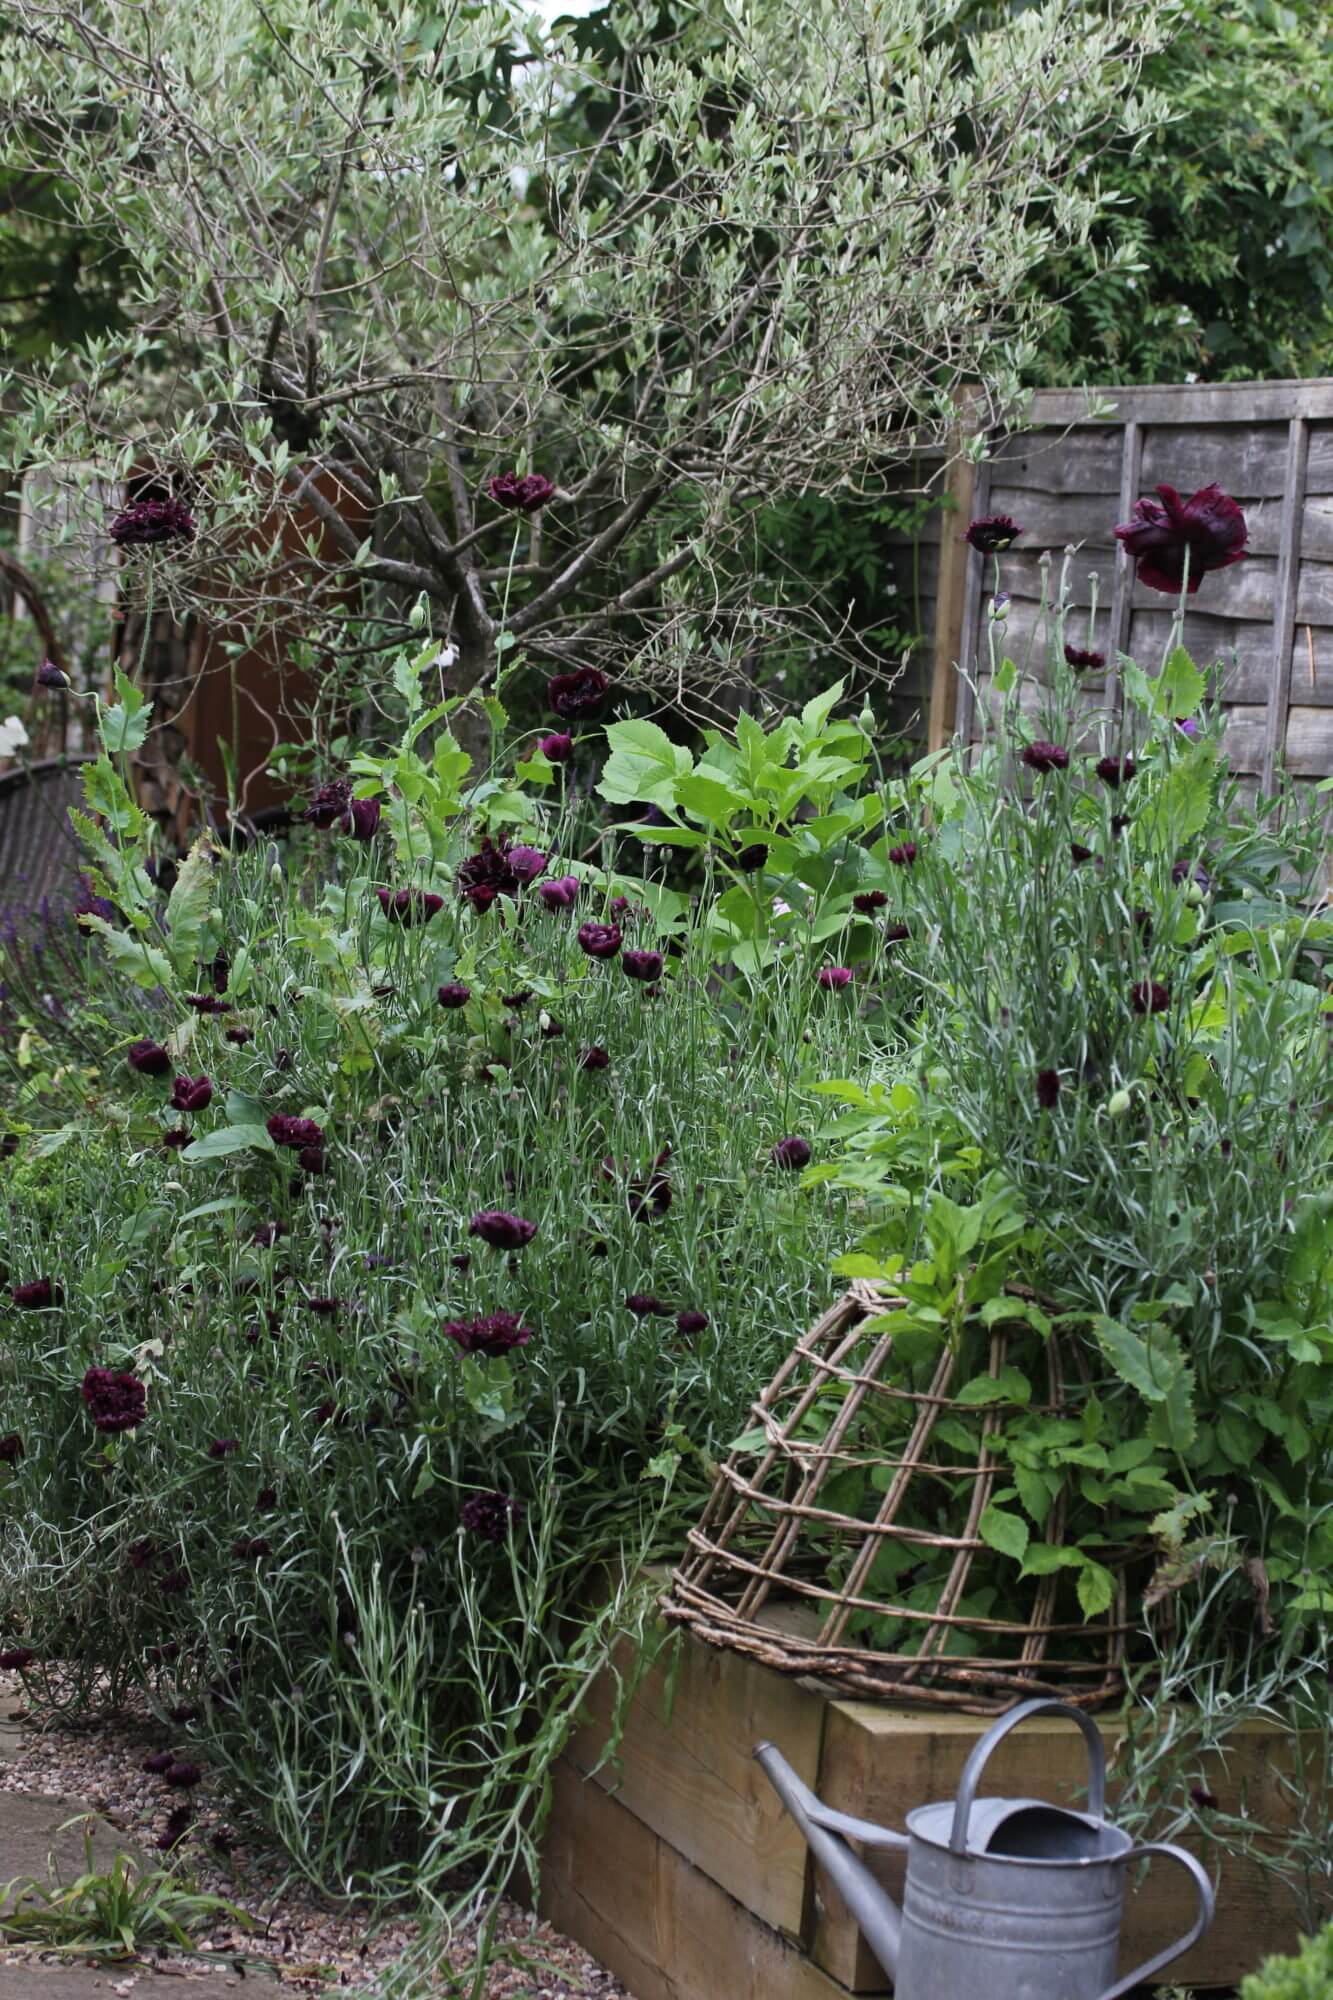 Black cornflowers and Olive tree. Metal watering can